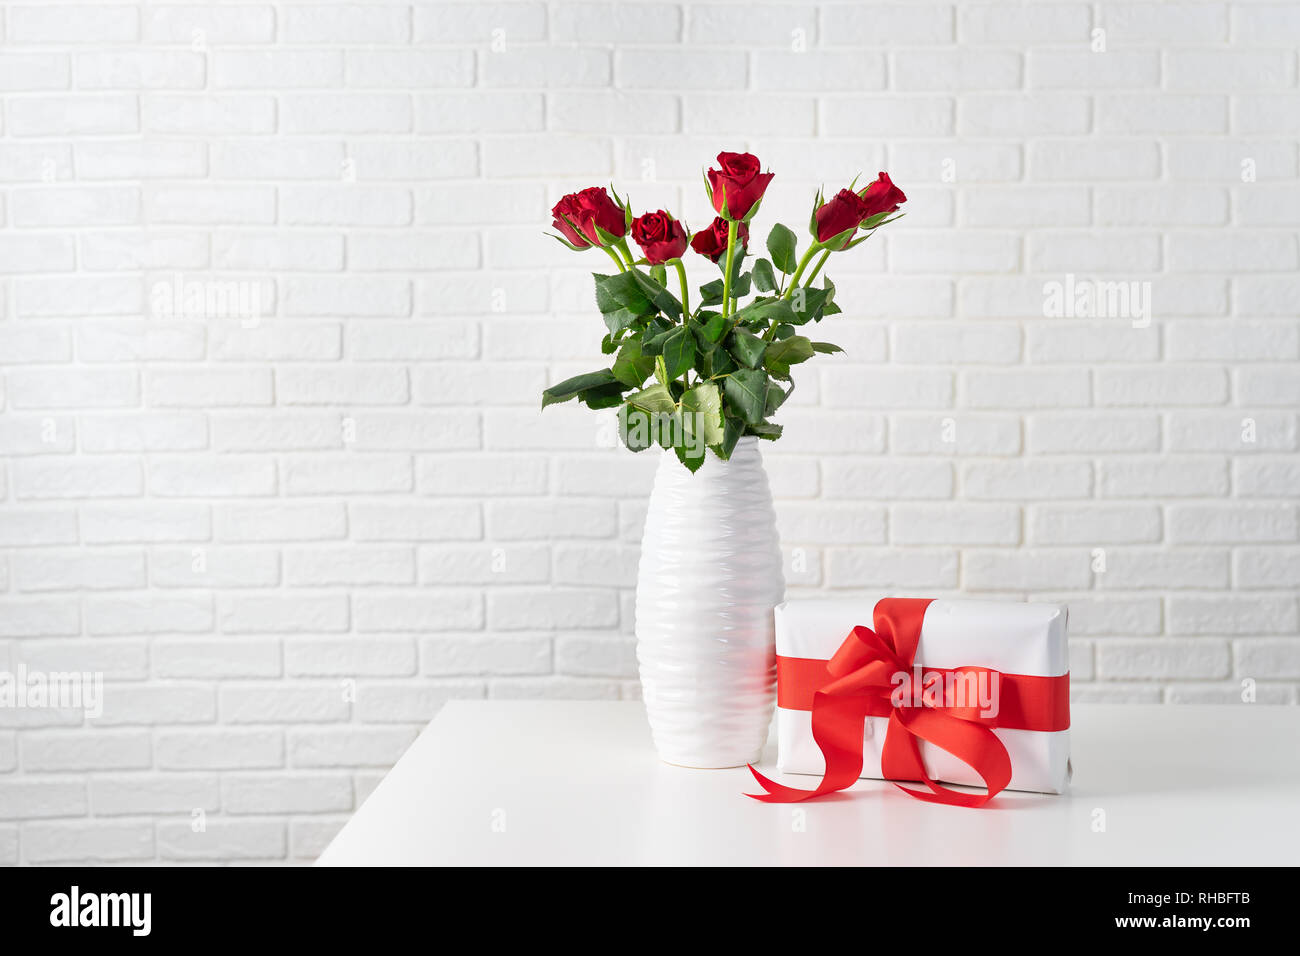 Red roses in white vase next to a gift box with red ribbon against white brocks wall Stock Photo